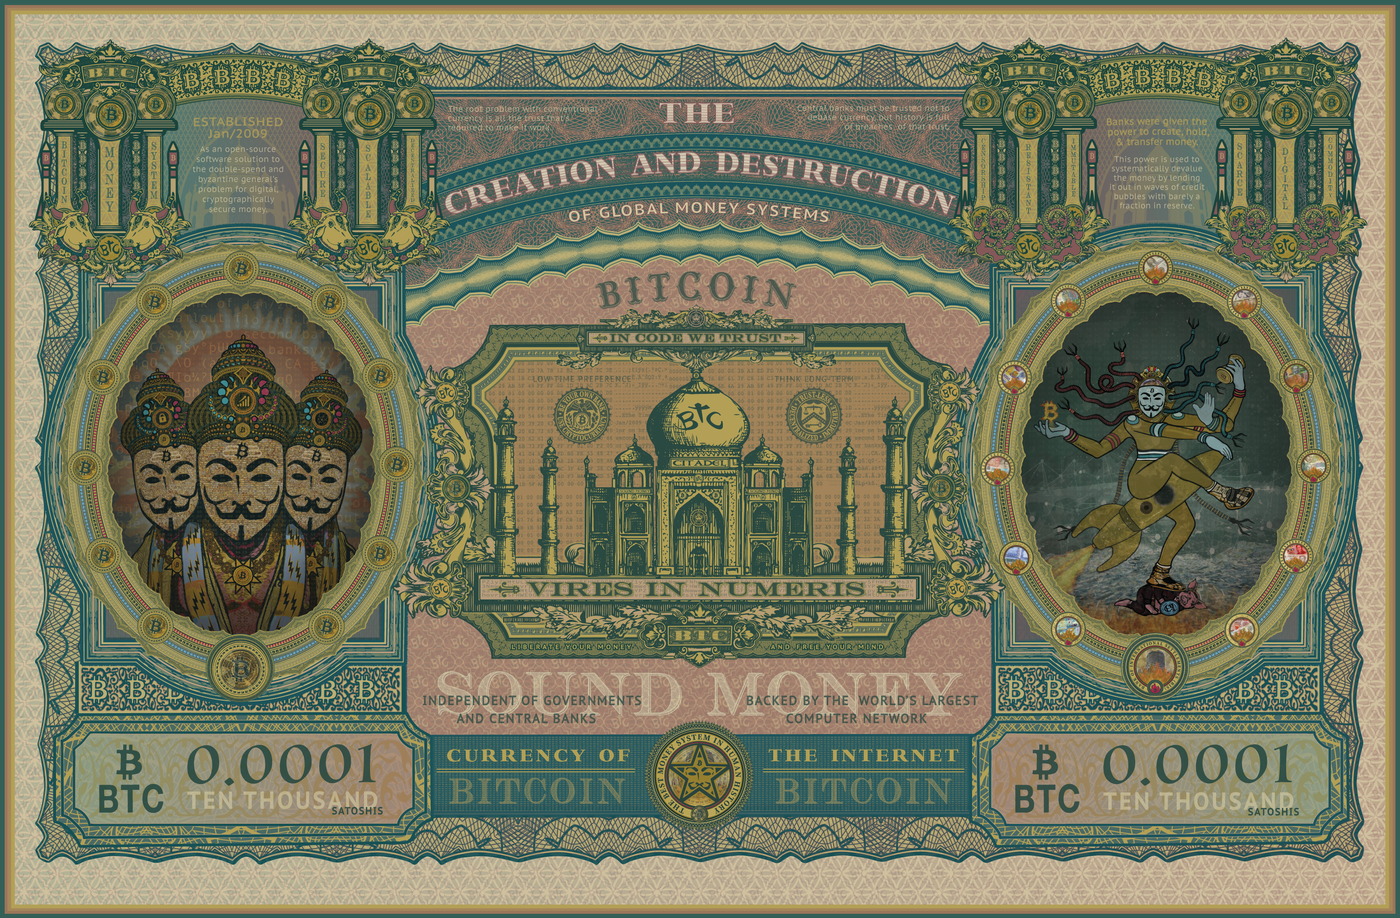 The Creation and Destruction of Global Money Systems (Bitcoin Art by Lucho Poletti)